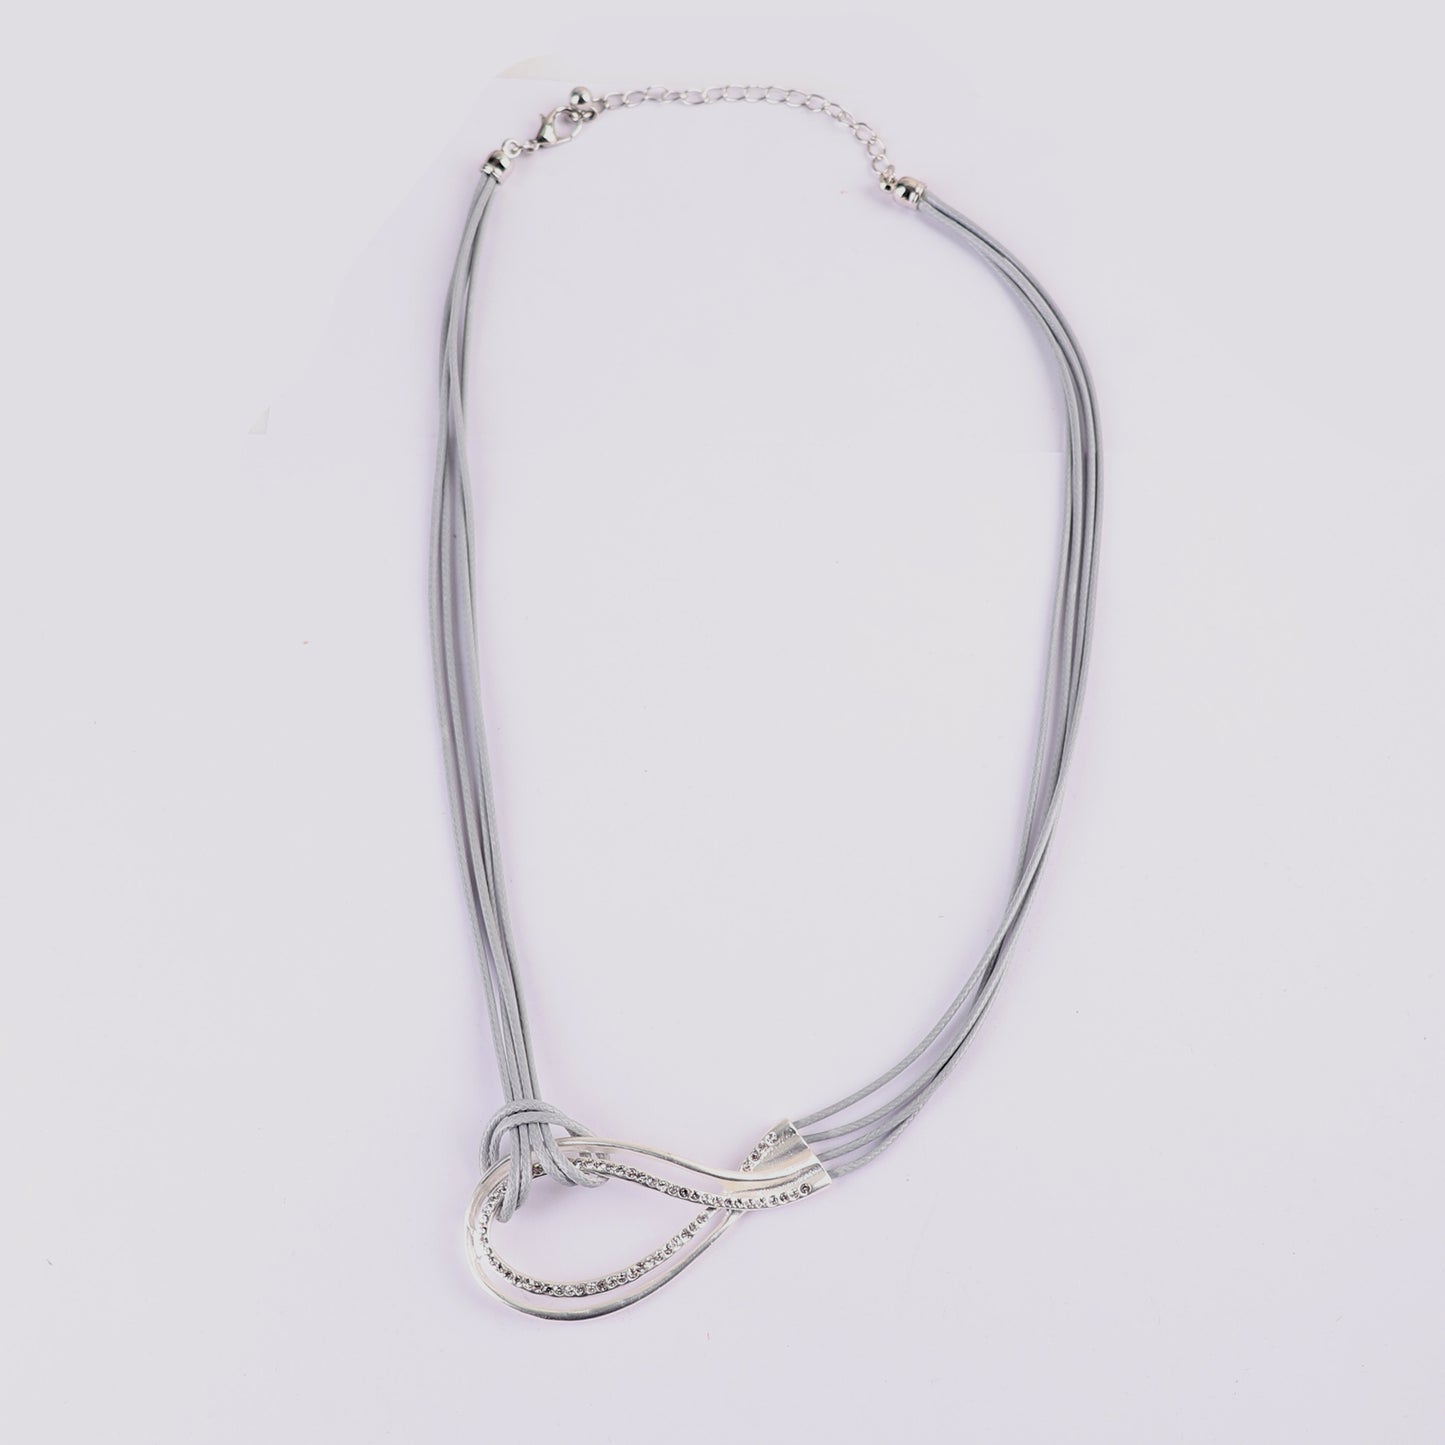 Necklace,Twisted Loop Necklace in Grey - Cippele Multi Store